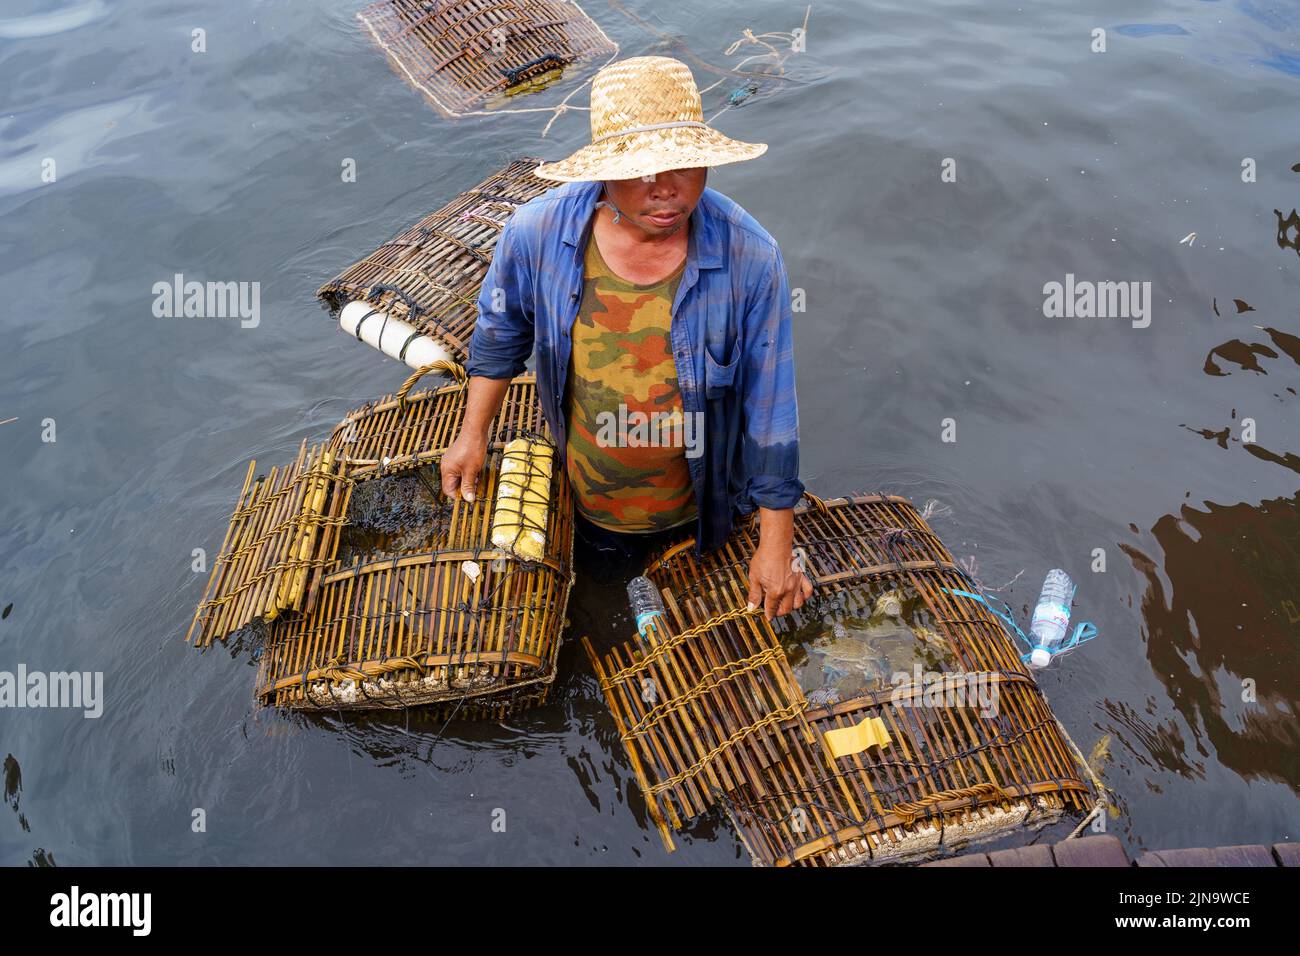 Cambodia. The seaside resort of Kep. Krong Kep Province. Crab market. Crabs are kept in submerged baskets to keep them fresh Stock Photo